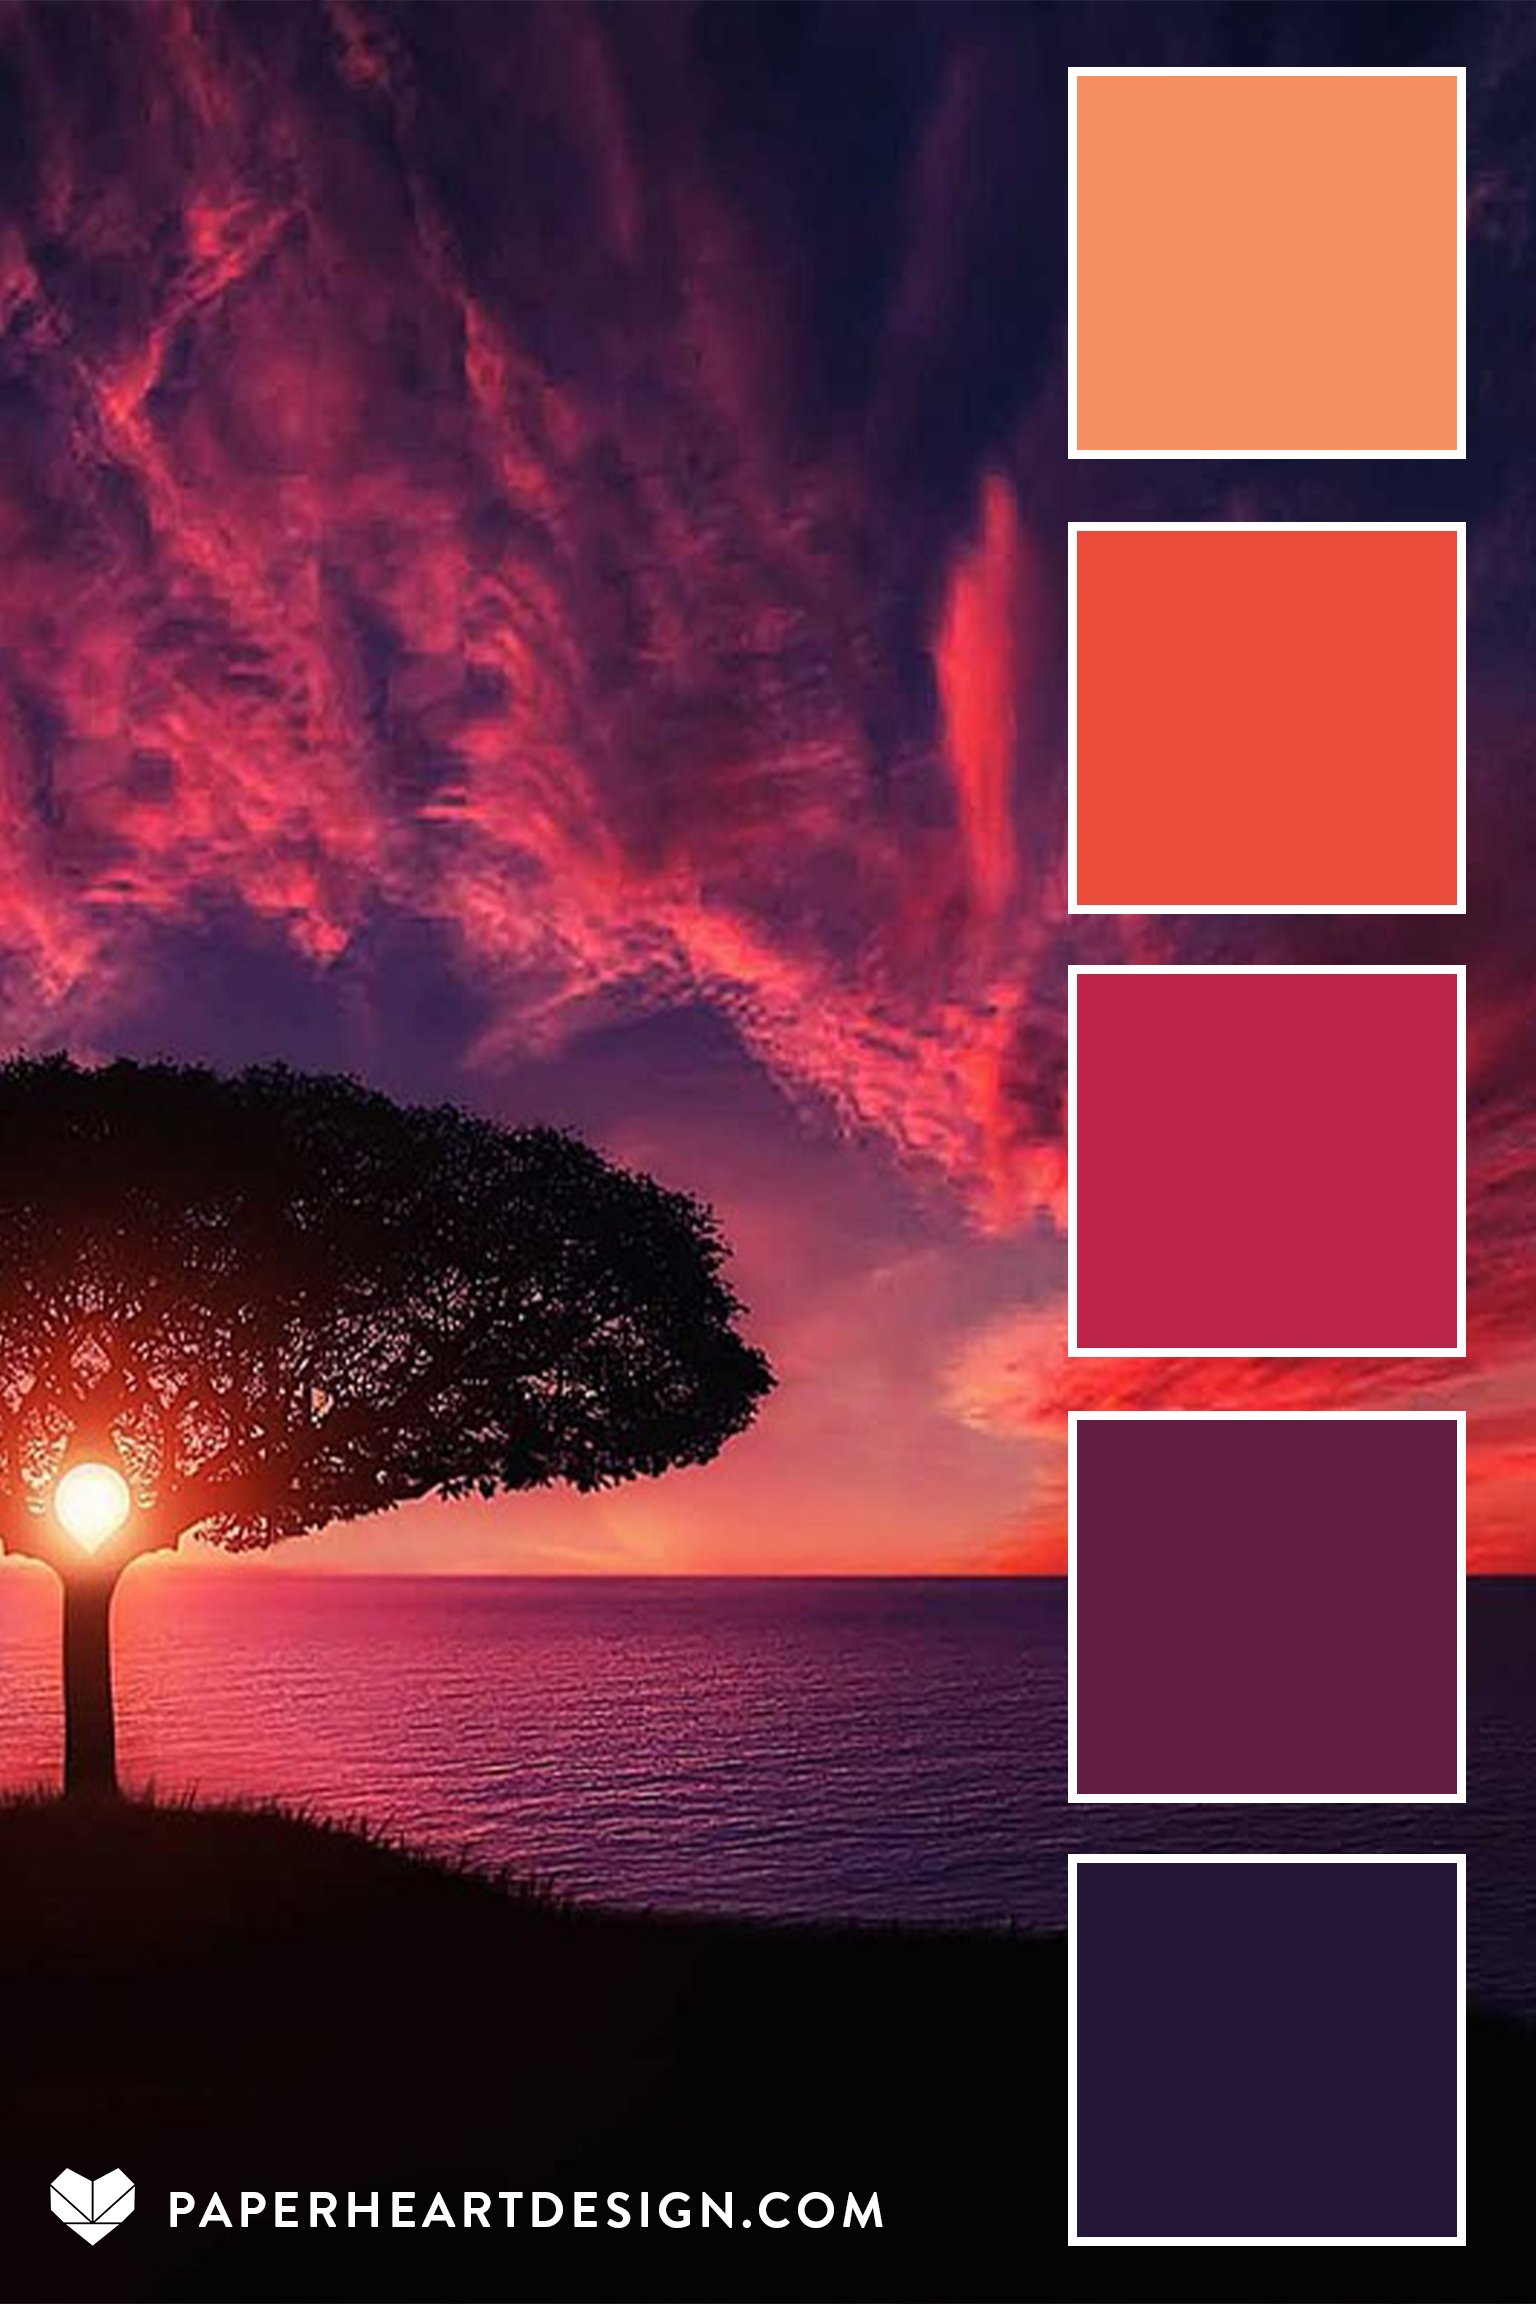 PANTONE Color of the Year 2000-2023 #pantone #color  Pantone color, Pantone  color chart, Pantone colour palettes